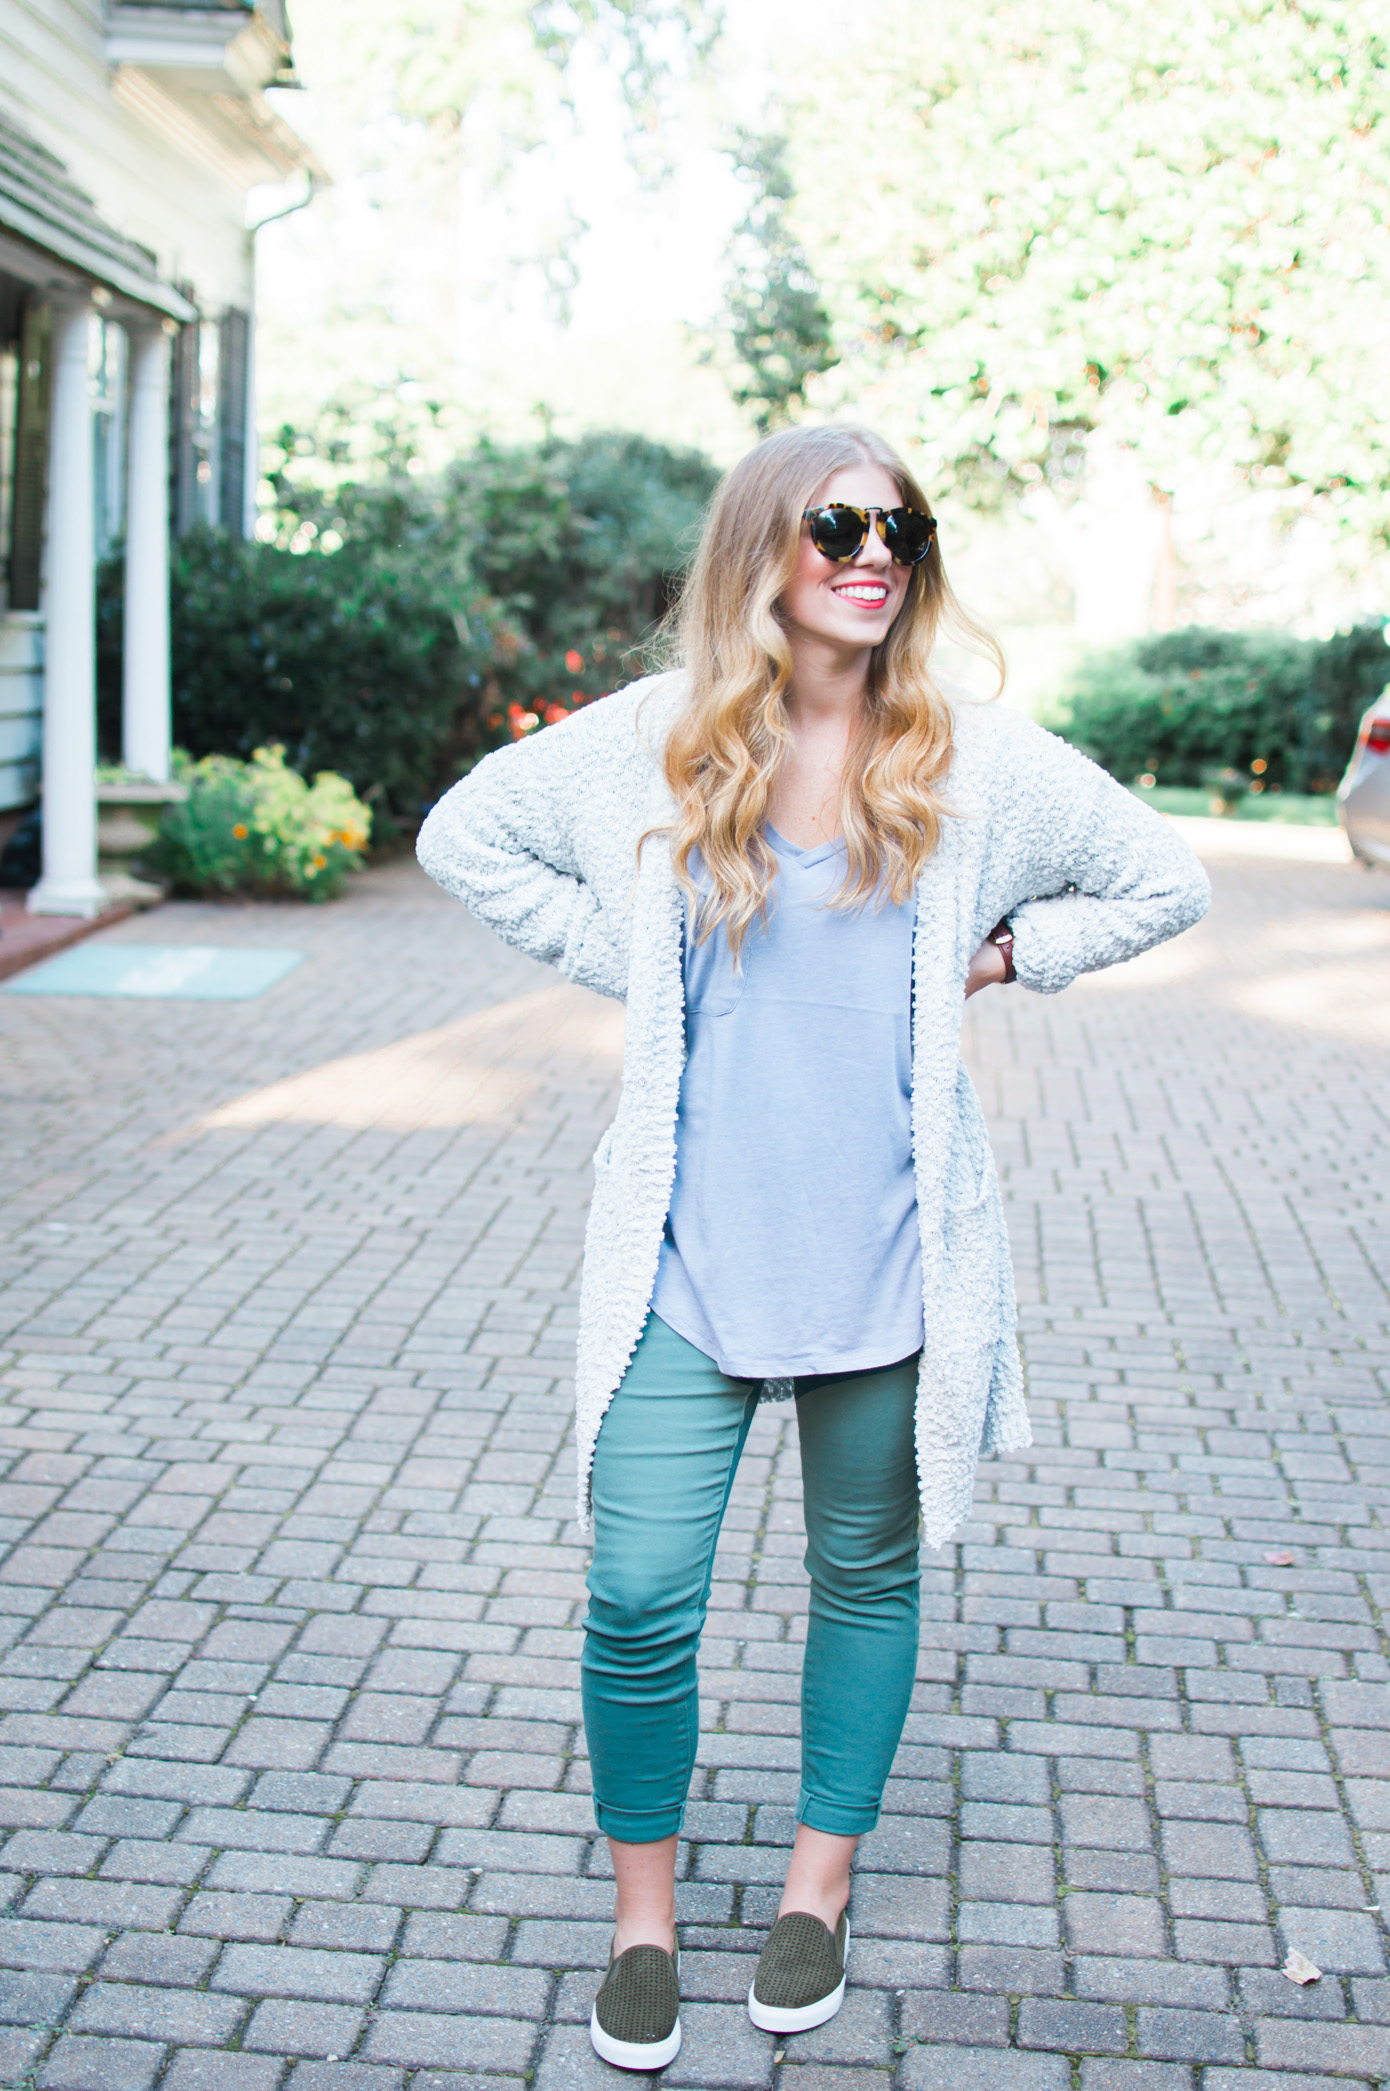 Olive Green Pants for Fall | How to Style Green Pants | Louella Reese Life & Style Blog